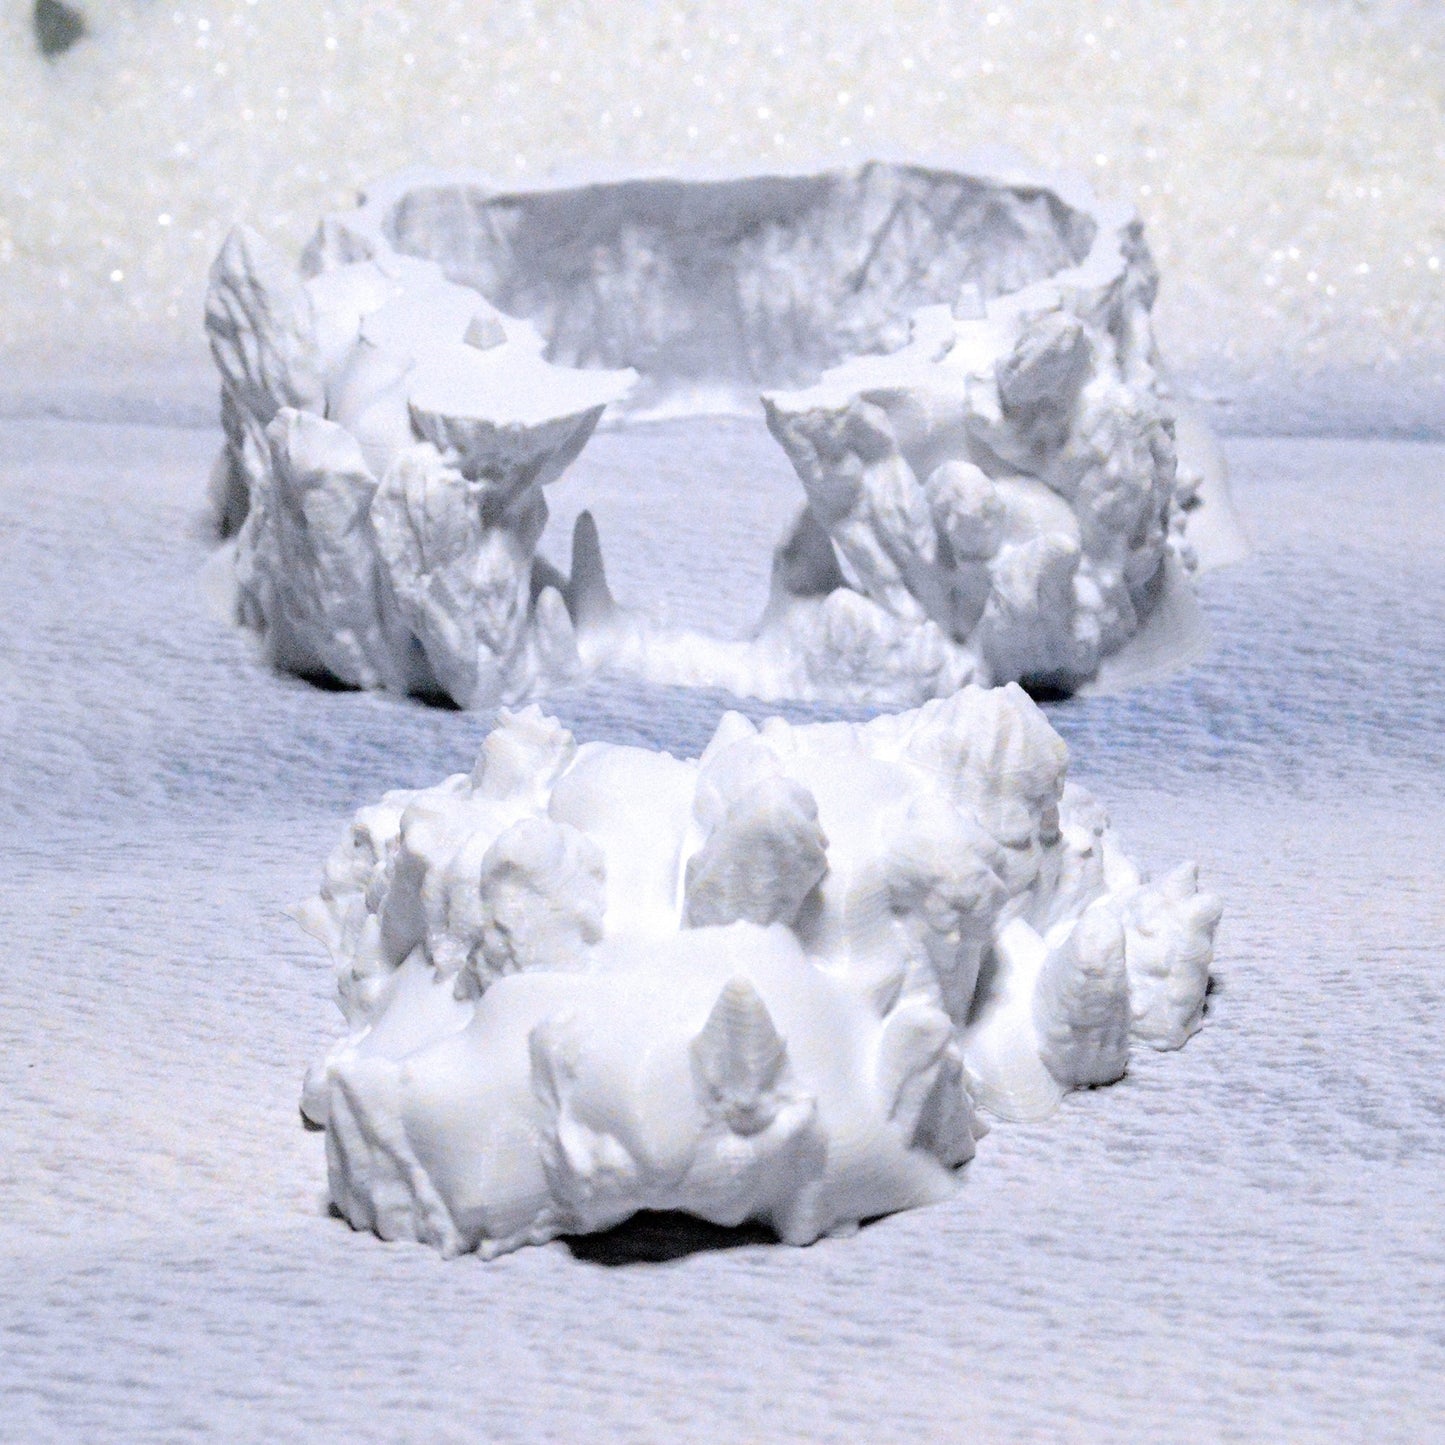 Ice Cave 15mm 28mm 32mm for D&D Icewind Dale Terrain, Frostgrave DnD Pathfinder Arctic Snowy Icy Den